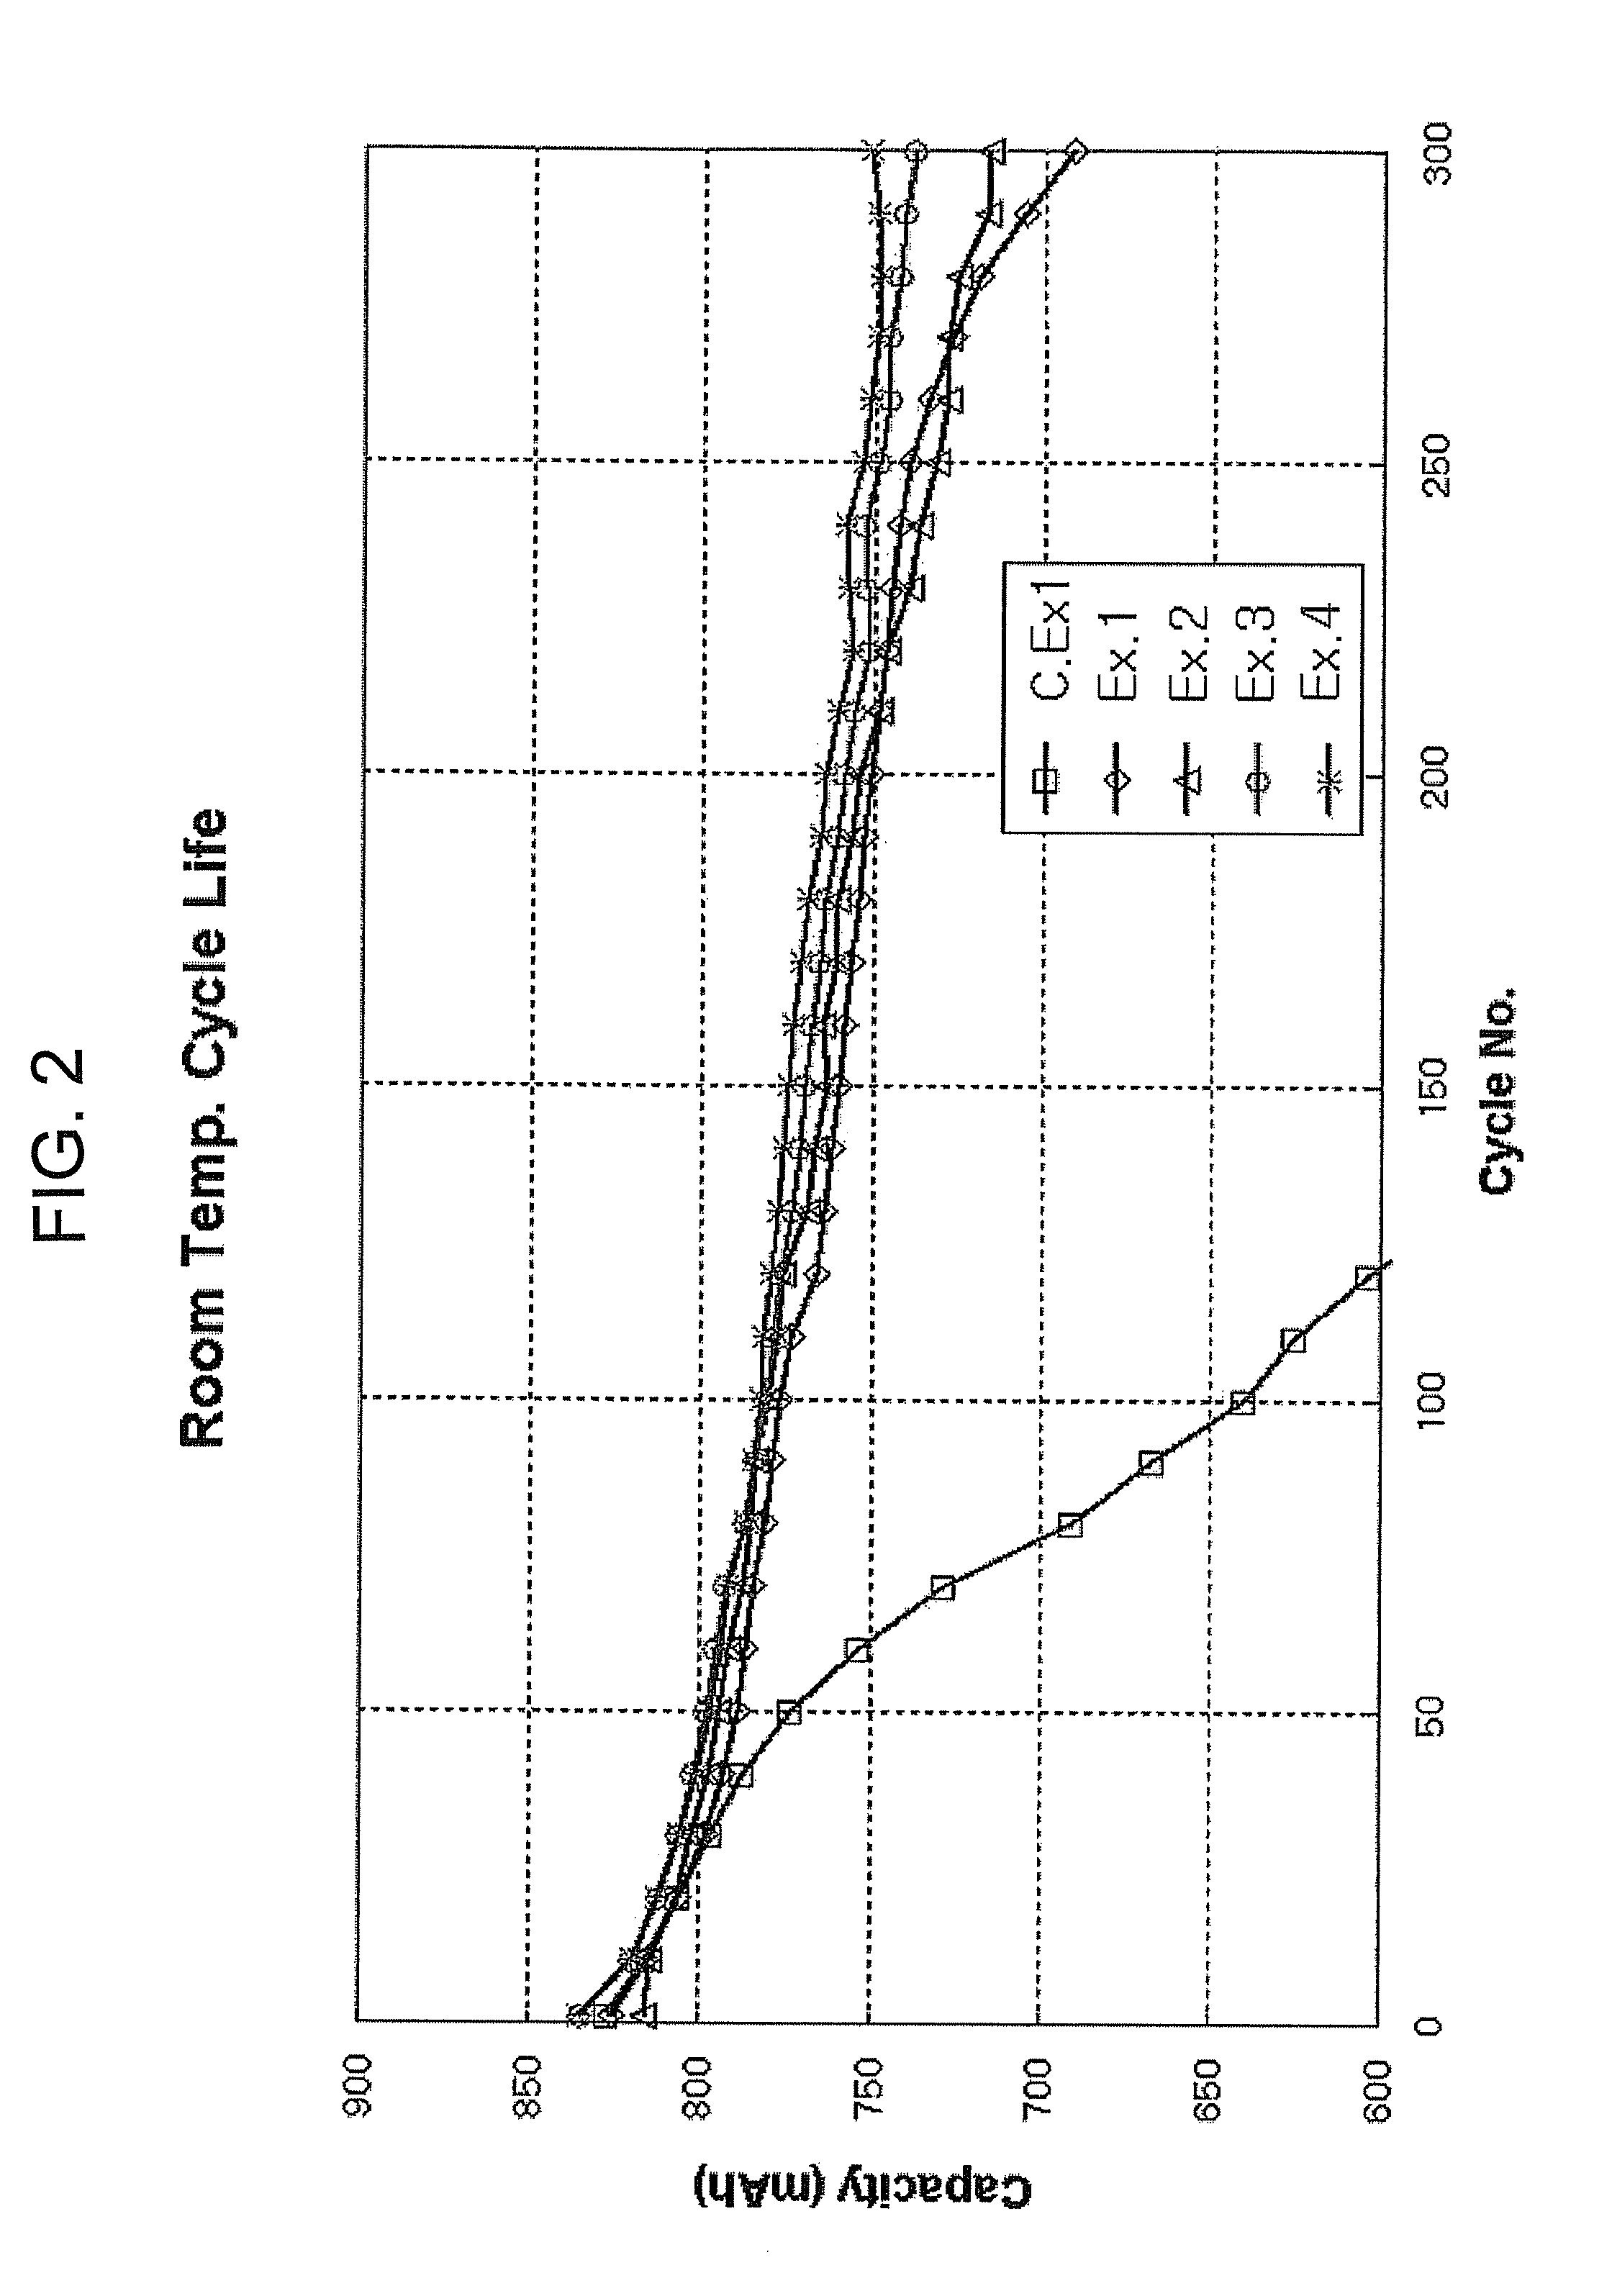 Electrolyte for lithium ion secondary battery and lithium ion secondary battery comprising the same